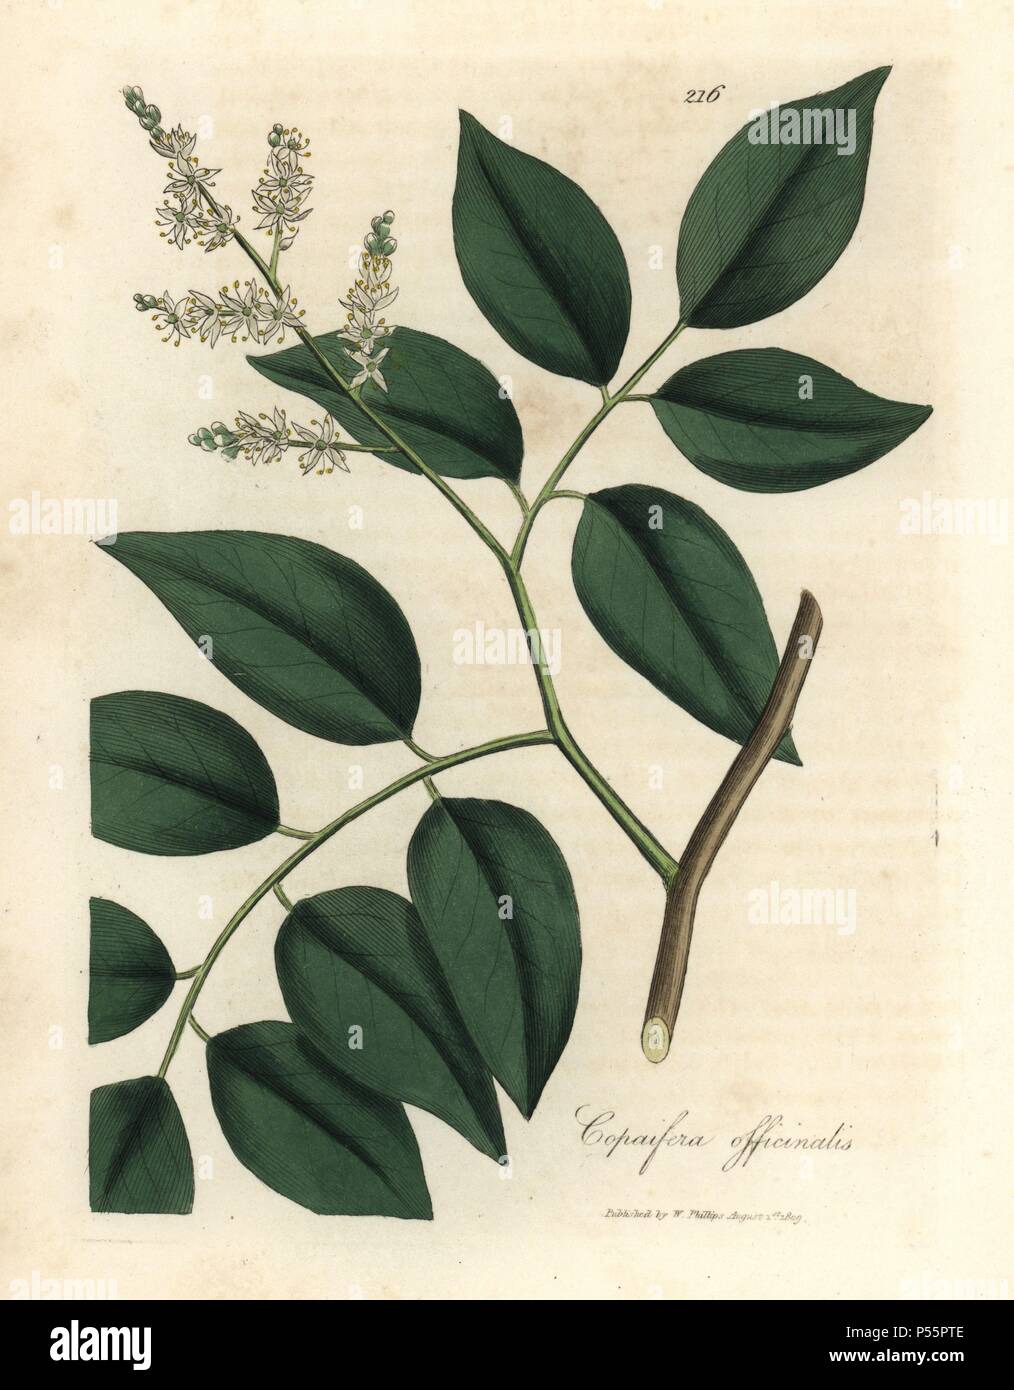 Balsam of Copaiva, Copaifera officinalis. Handcoloured copperplate engraving from a botanical illustration by James Sowerby from William Woodville and Sir William Jackson Hooker's 'Medical Botany,' John Bohn, London, 1832. The tireless Sowerby (1757-1822) drew over 2, 500 plants for Smith's mammoth 'English Botany' (1790-1814) and 440 mushrooms for 'Coloured Figures of English Fungi ' (1797) among many other works. Stock Photo